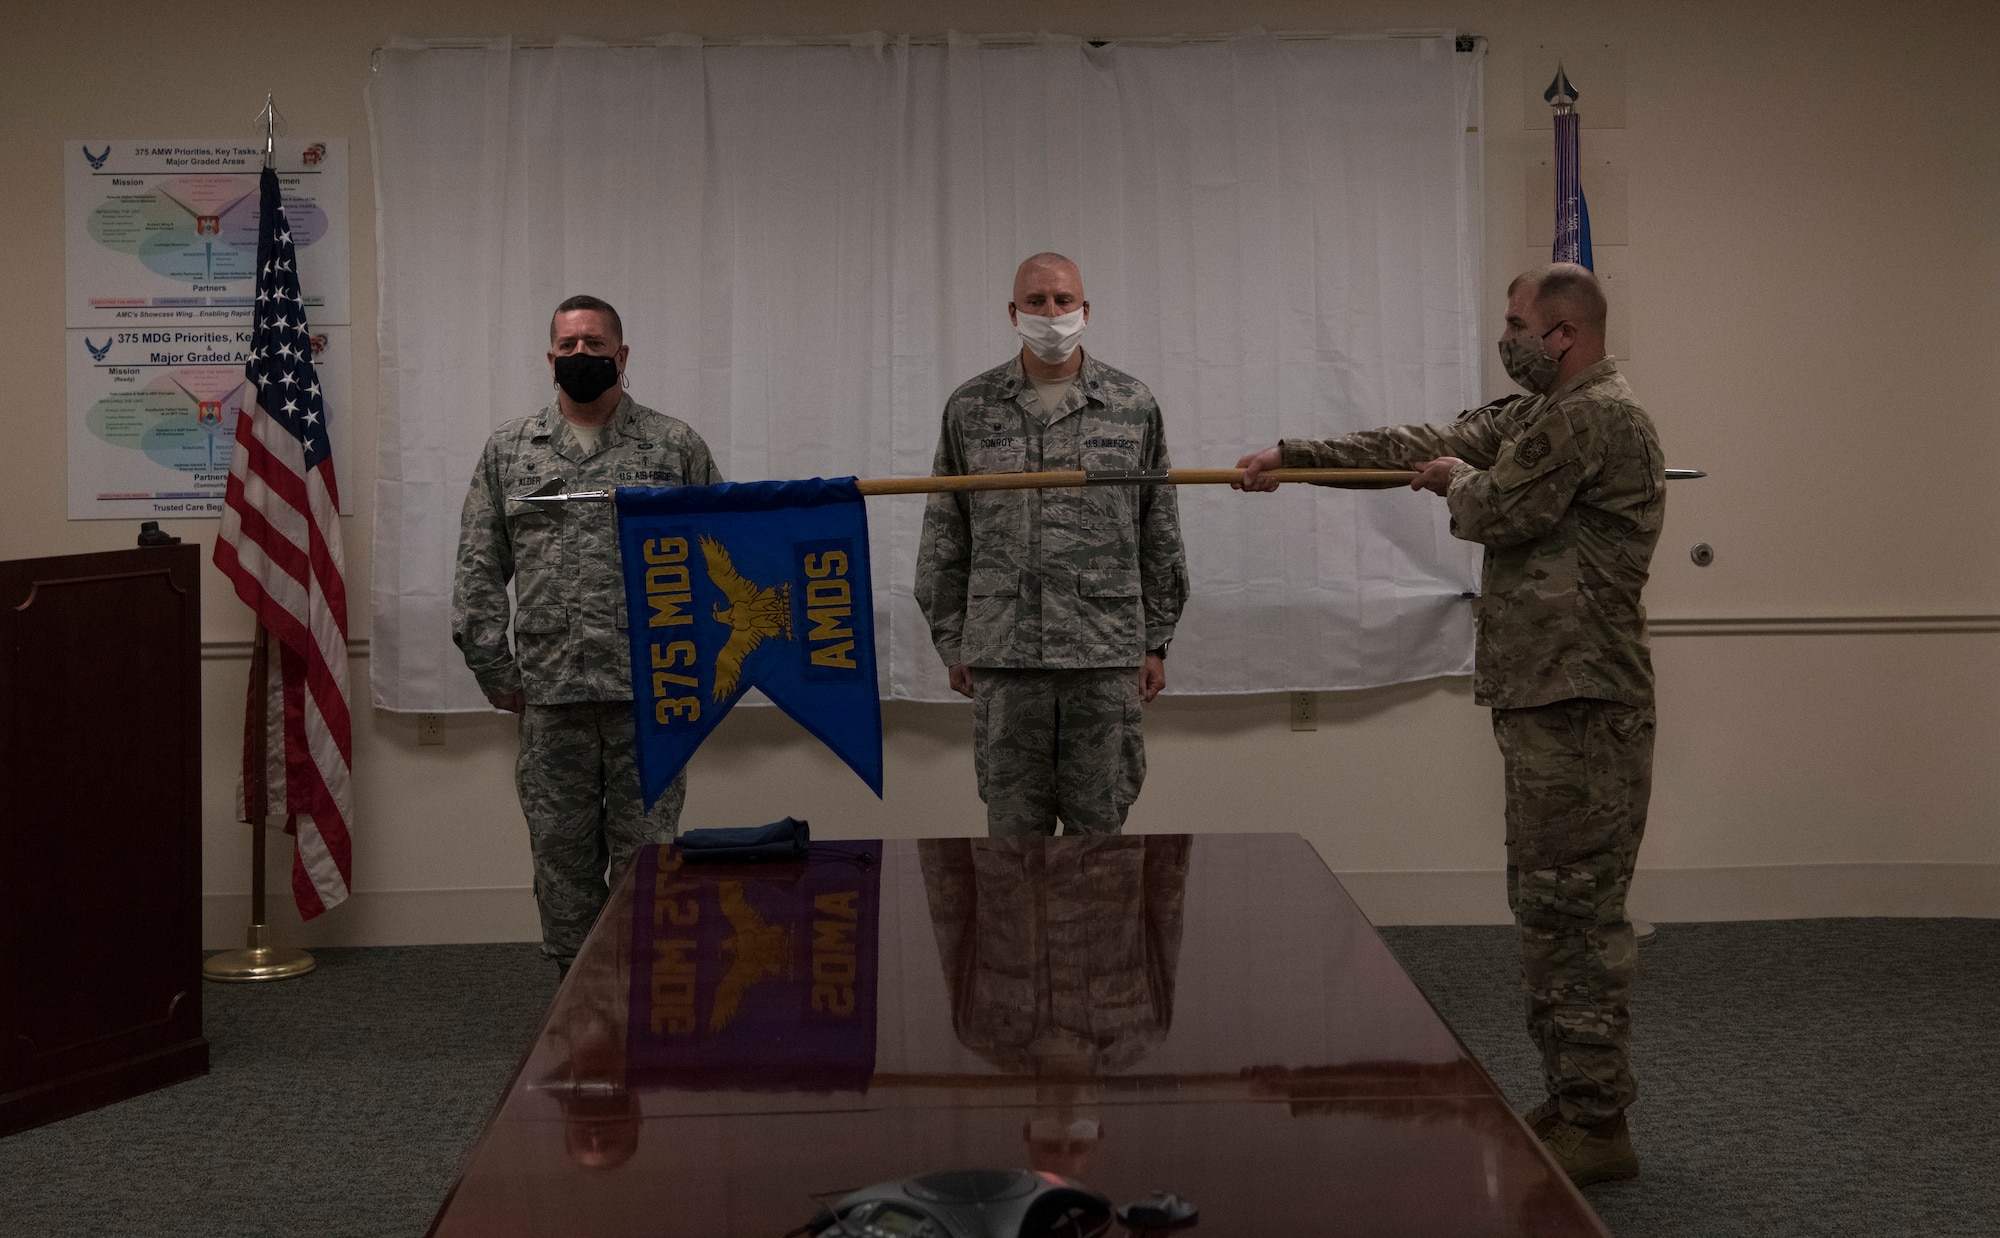 U.S Air Force officers stand behind guidon